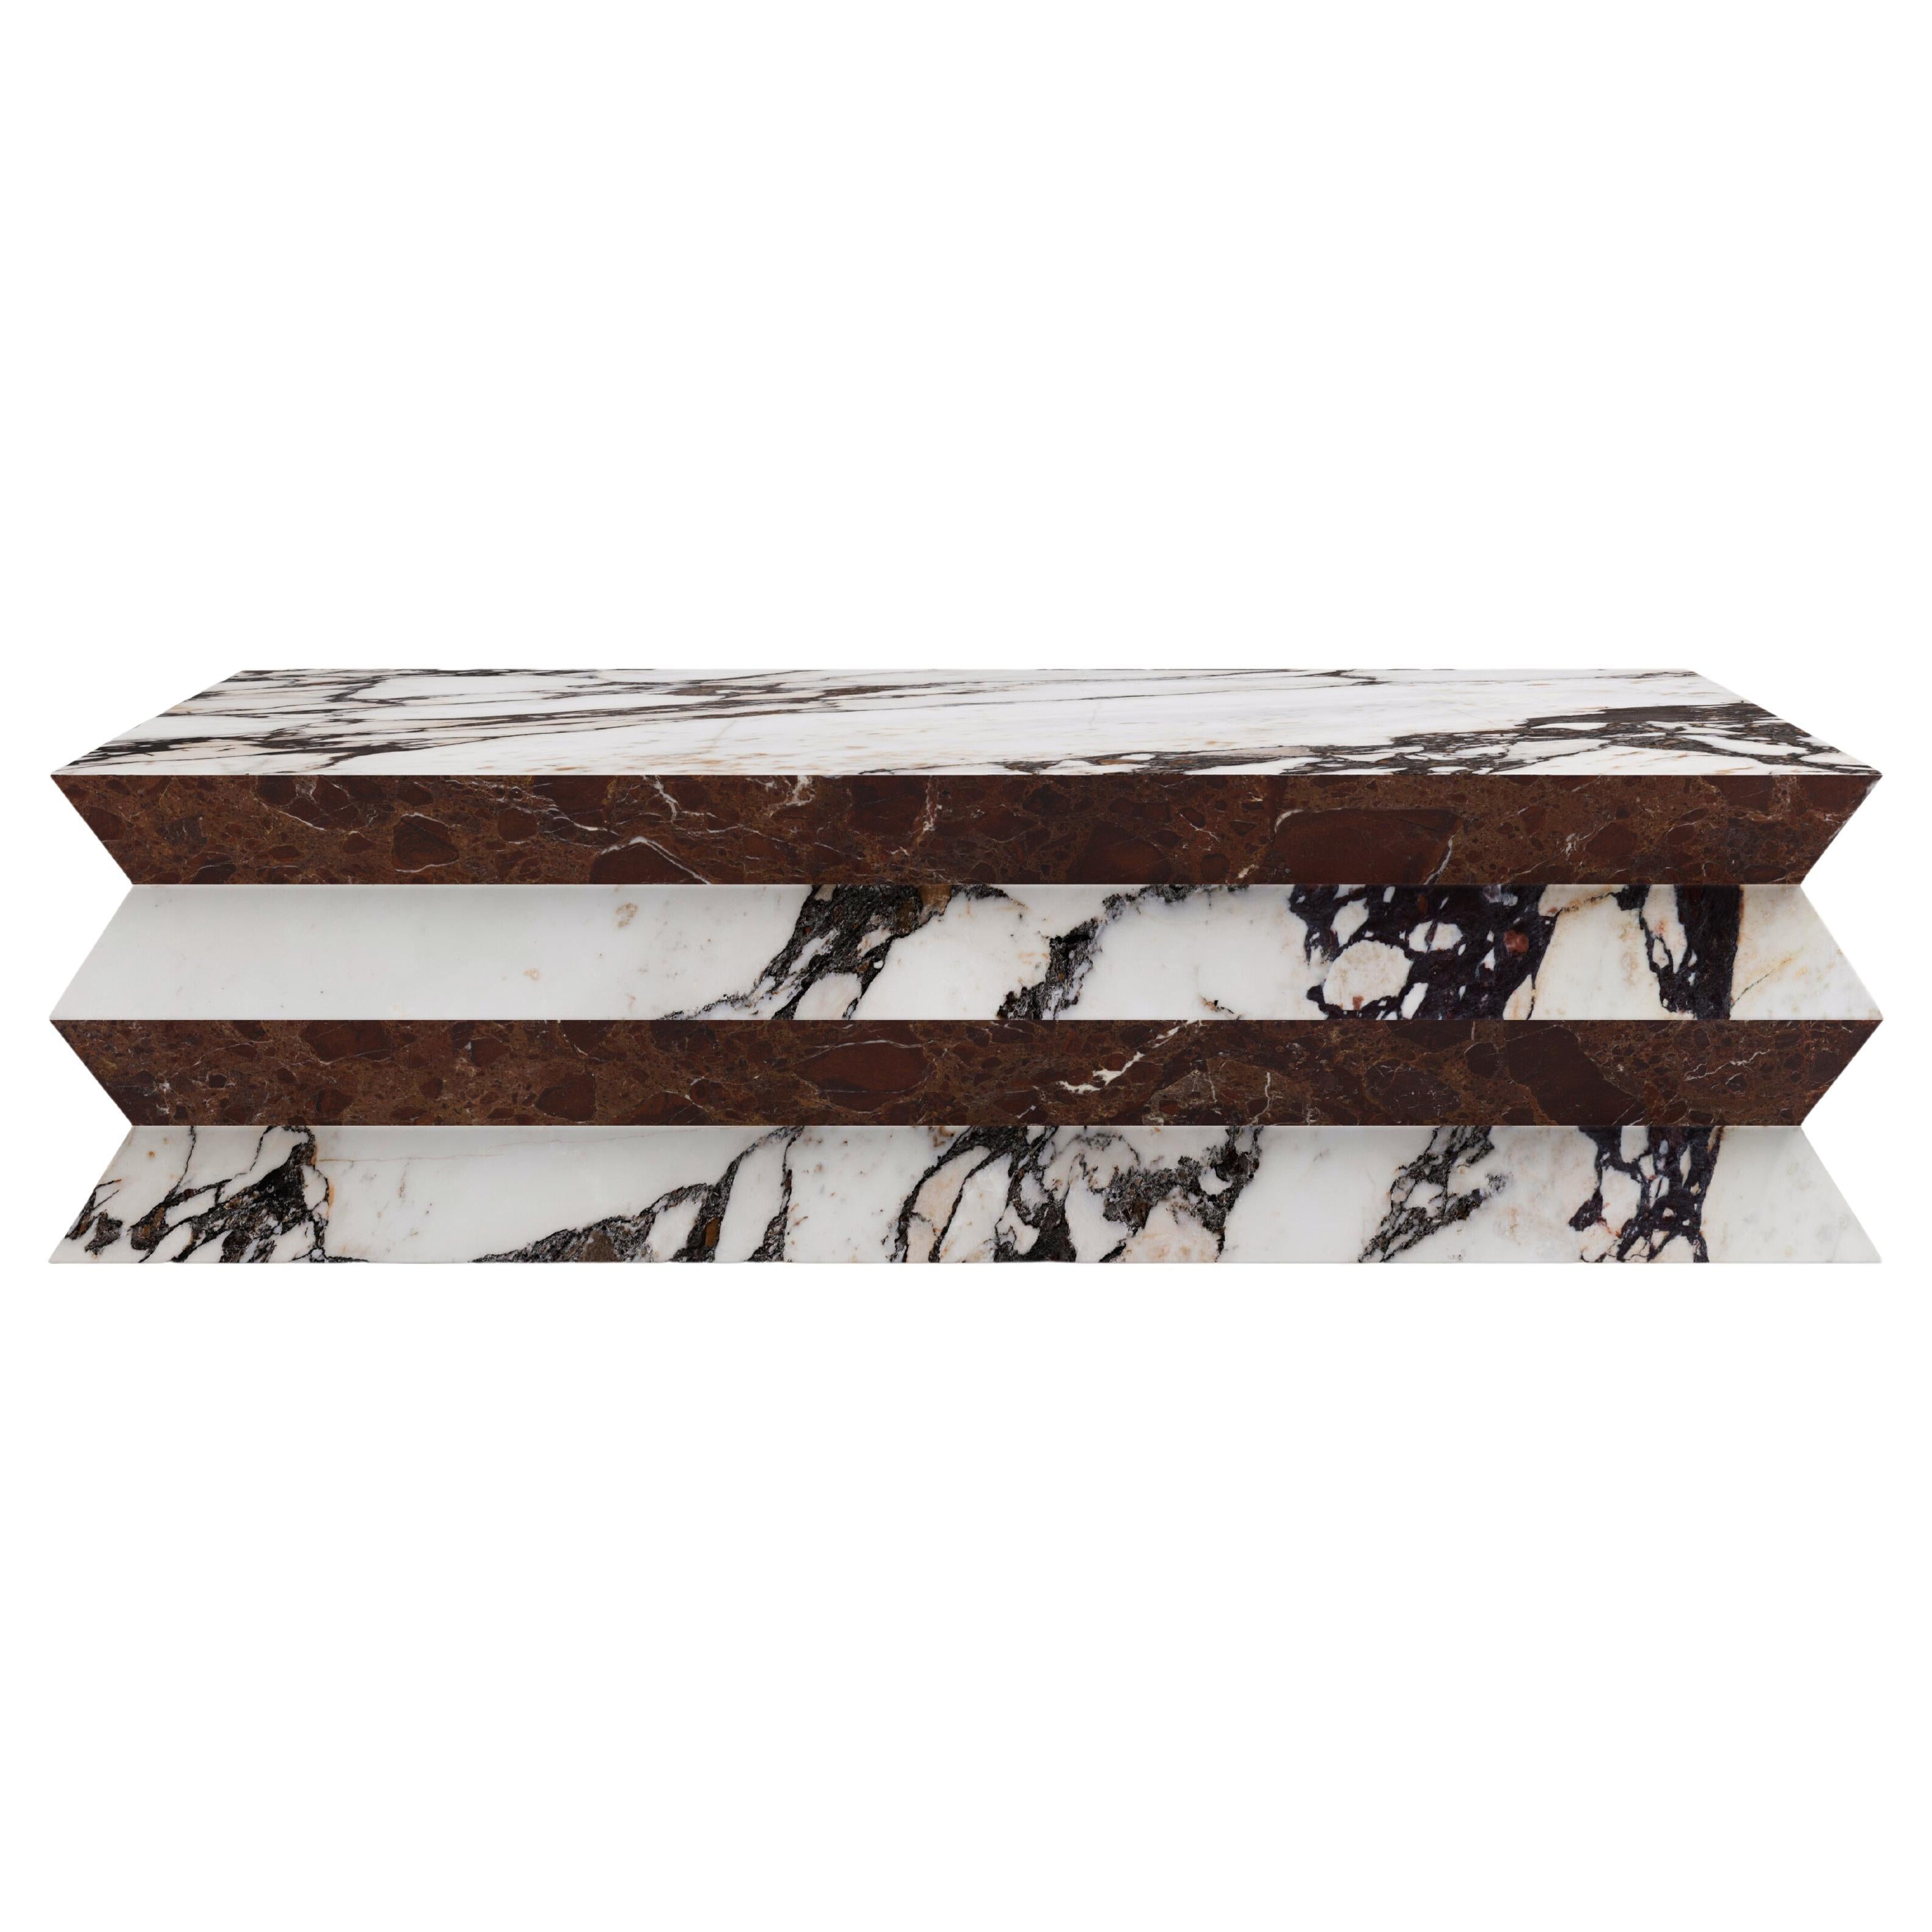 FORM(LA) Grinza Rectangle Coffee Table 72"L x 42"W x 16"H Calacatta Viola Marble For Sale